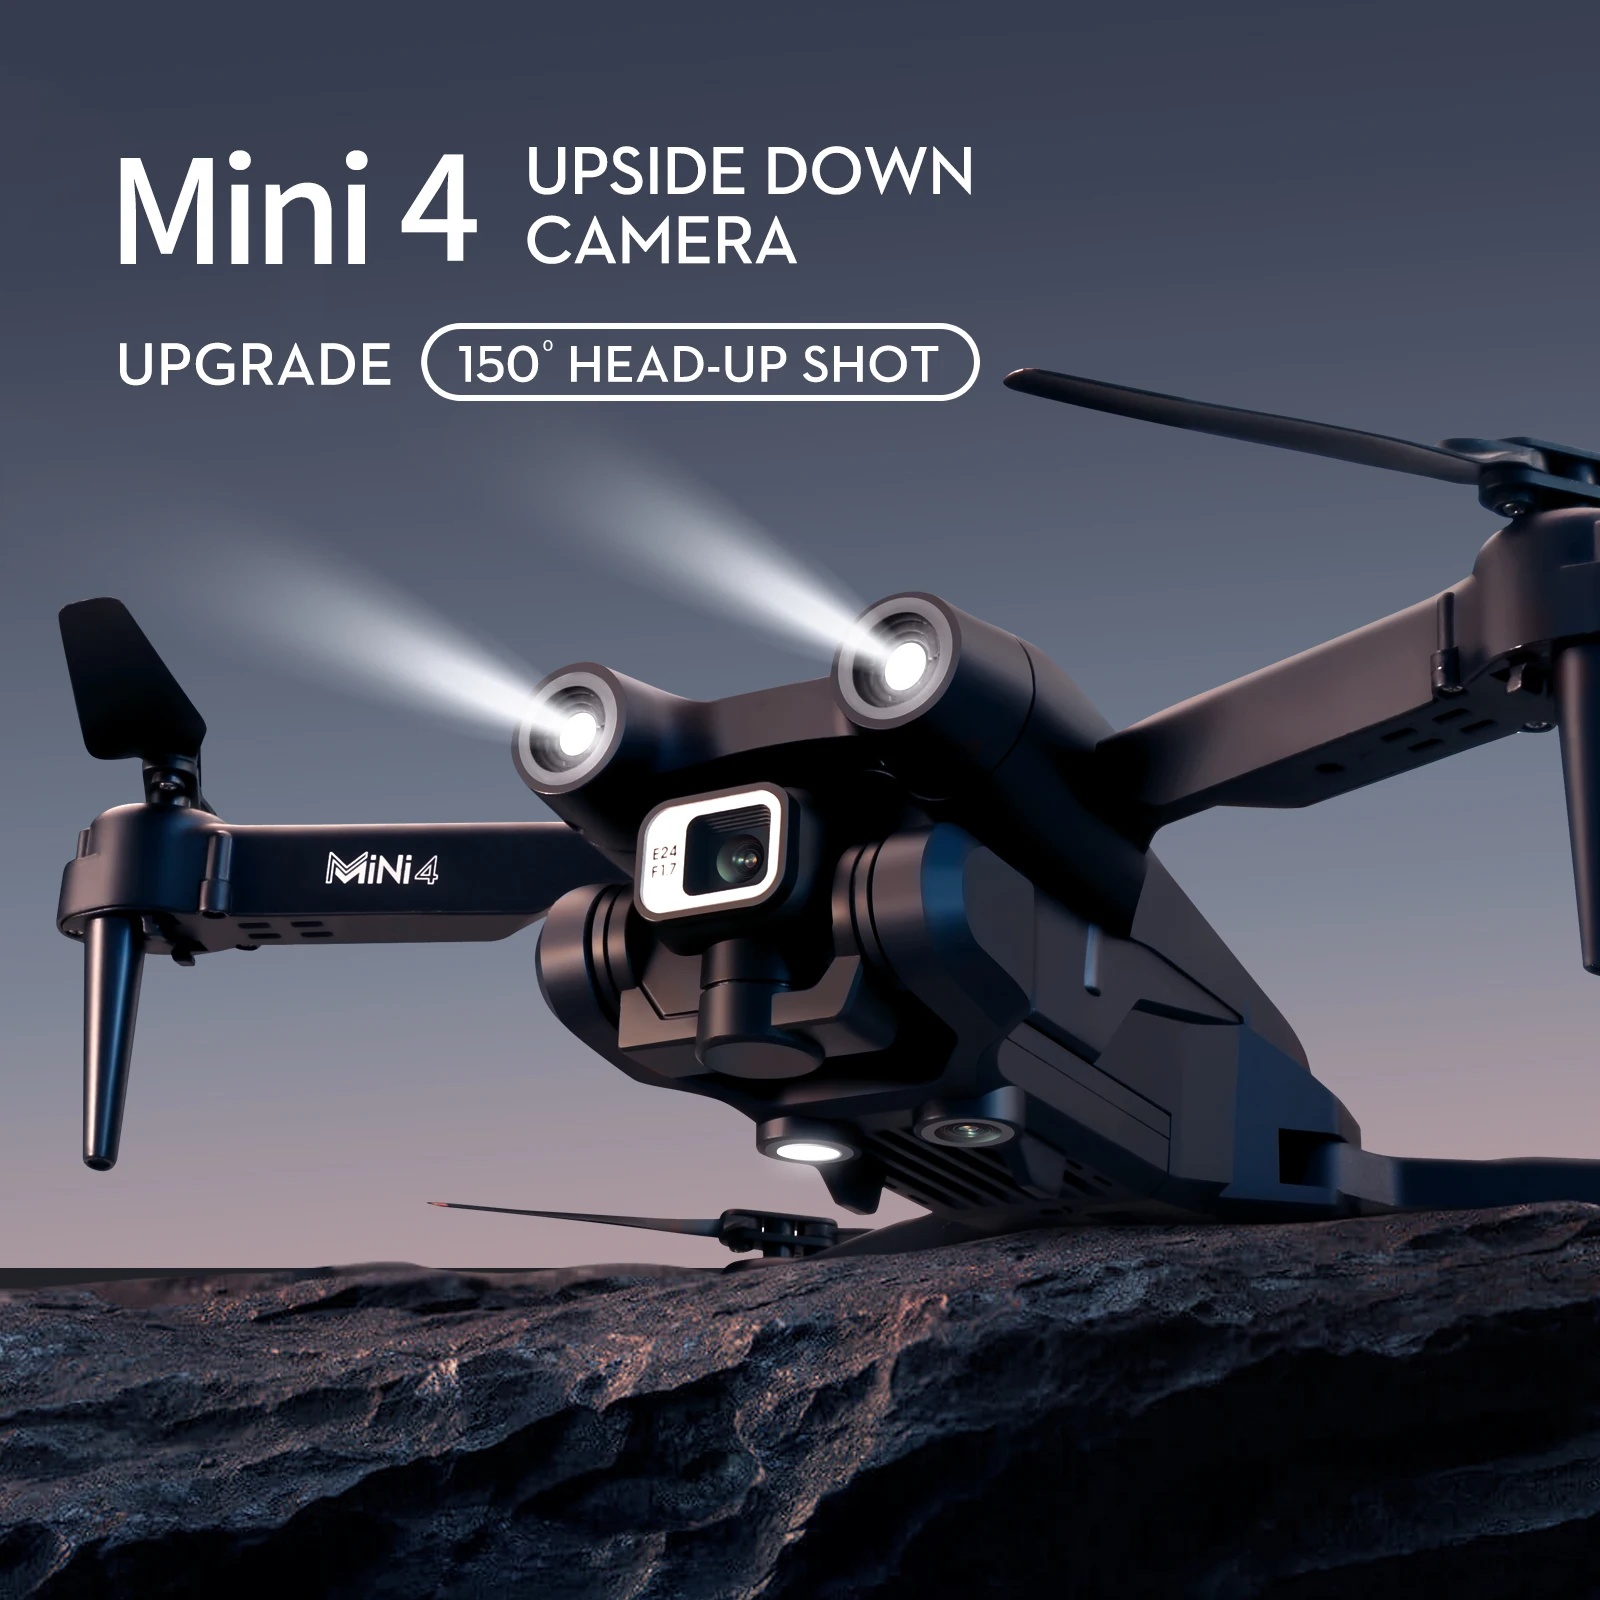 

MINI 4 Drone Aerial UAV 4K Invert Aerial Vehicle Optical Flow Location Obstacle Avoidance Remote Control Aircraft Toy Hot